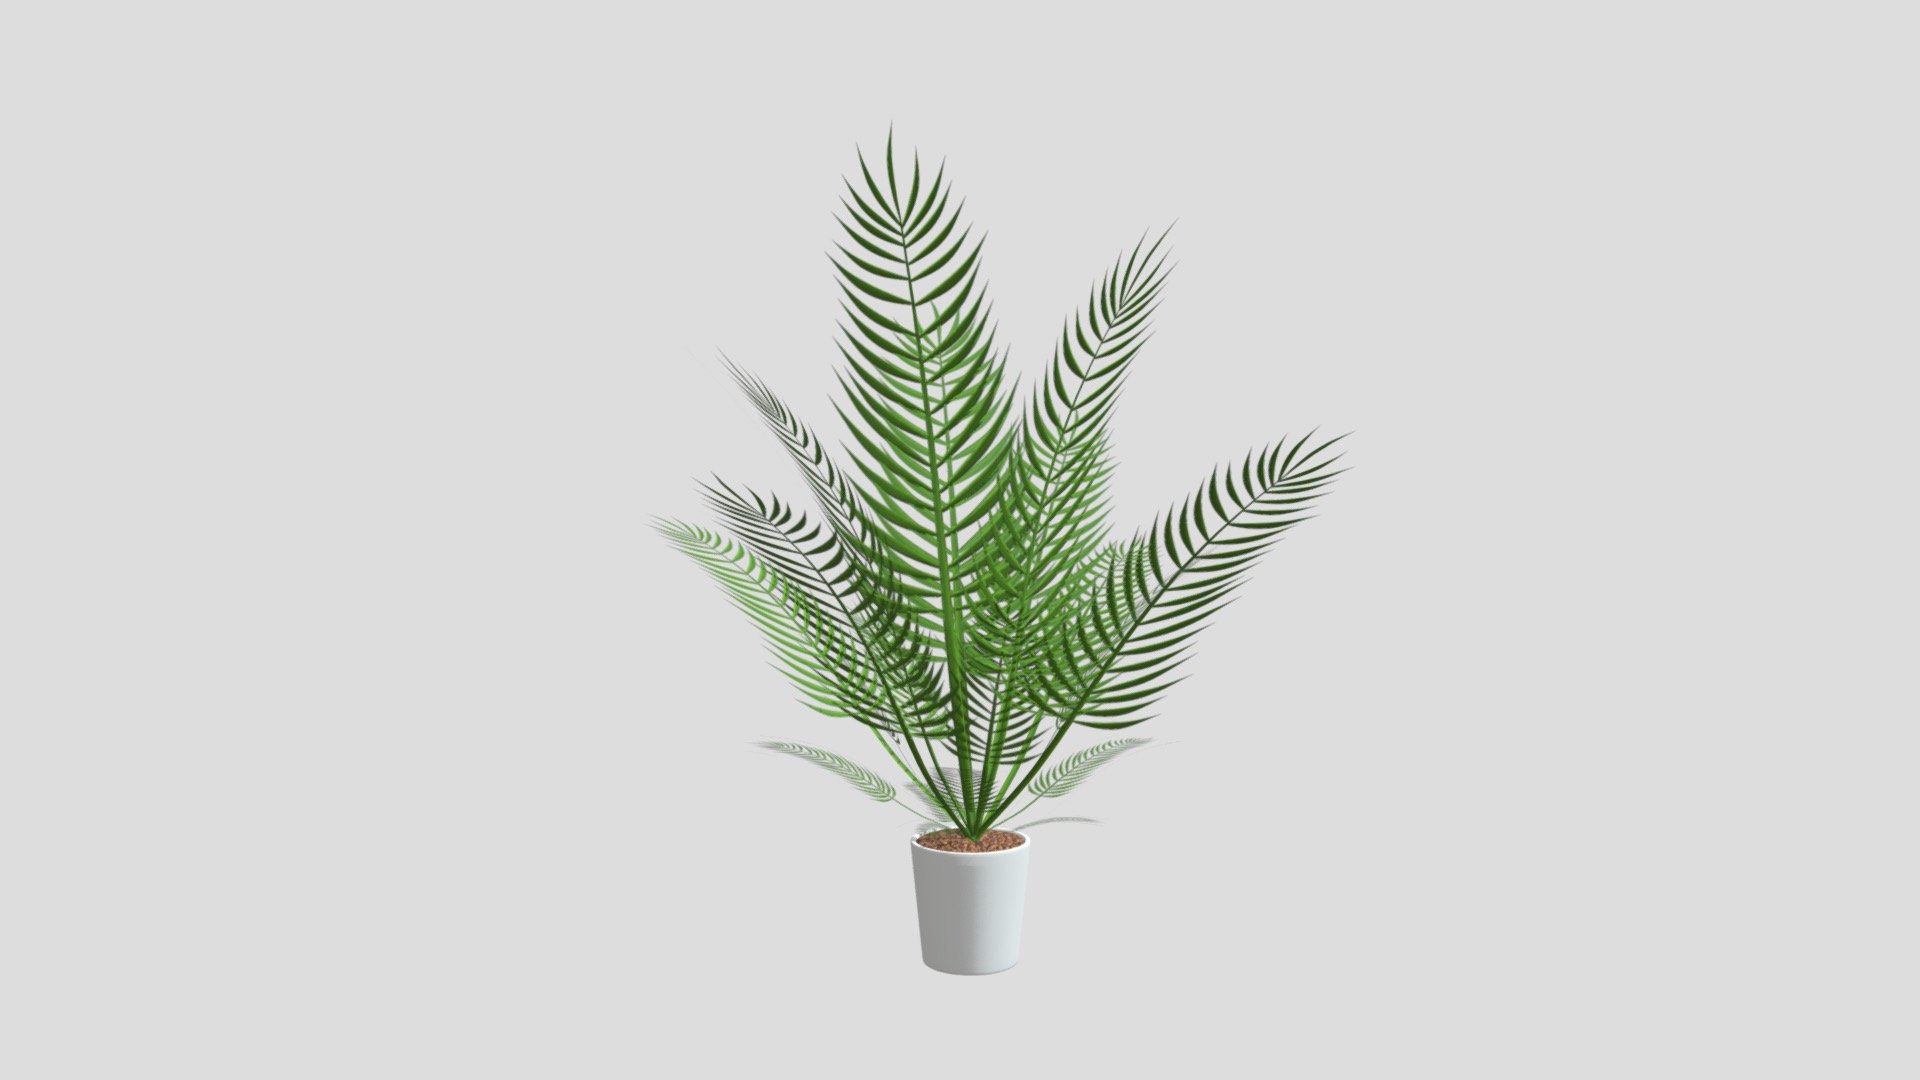 Textures: 1024 × 1024, Colors on texture: Green, brown, white.

Has Normal Map: 1024 × 1024.

Materials: 3 - Palm Plant, Dirt, Pot.

Smooth shaded.

Non-Mirrored.

Subdivision Level: 0

Origin located on bottom-center.

Polygons: 6060

Vertices: 4037

Formats: Fbx, Obj, Stl, Dae.

I hope you enjoy the model! - Palm Plant - Buy Royalty Free 3D model by Ed+ (@EDplus) 3d model